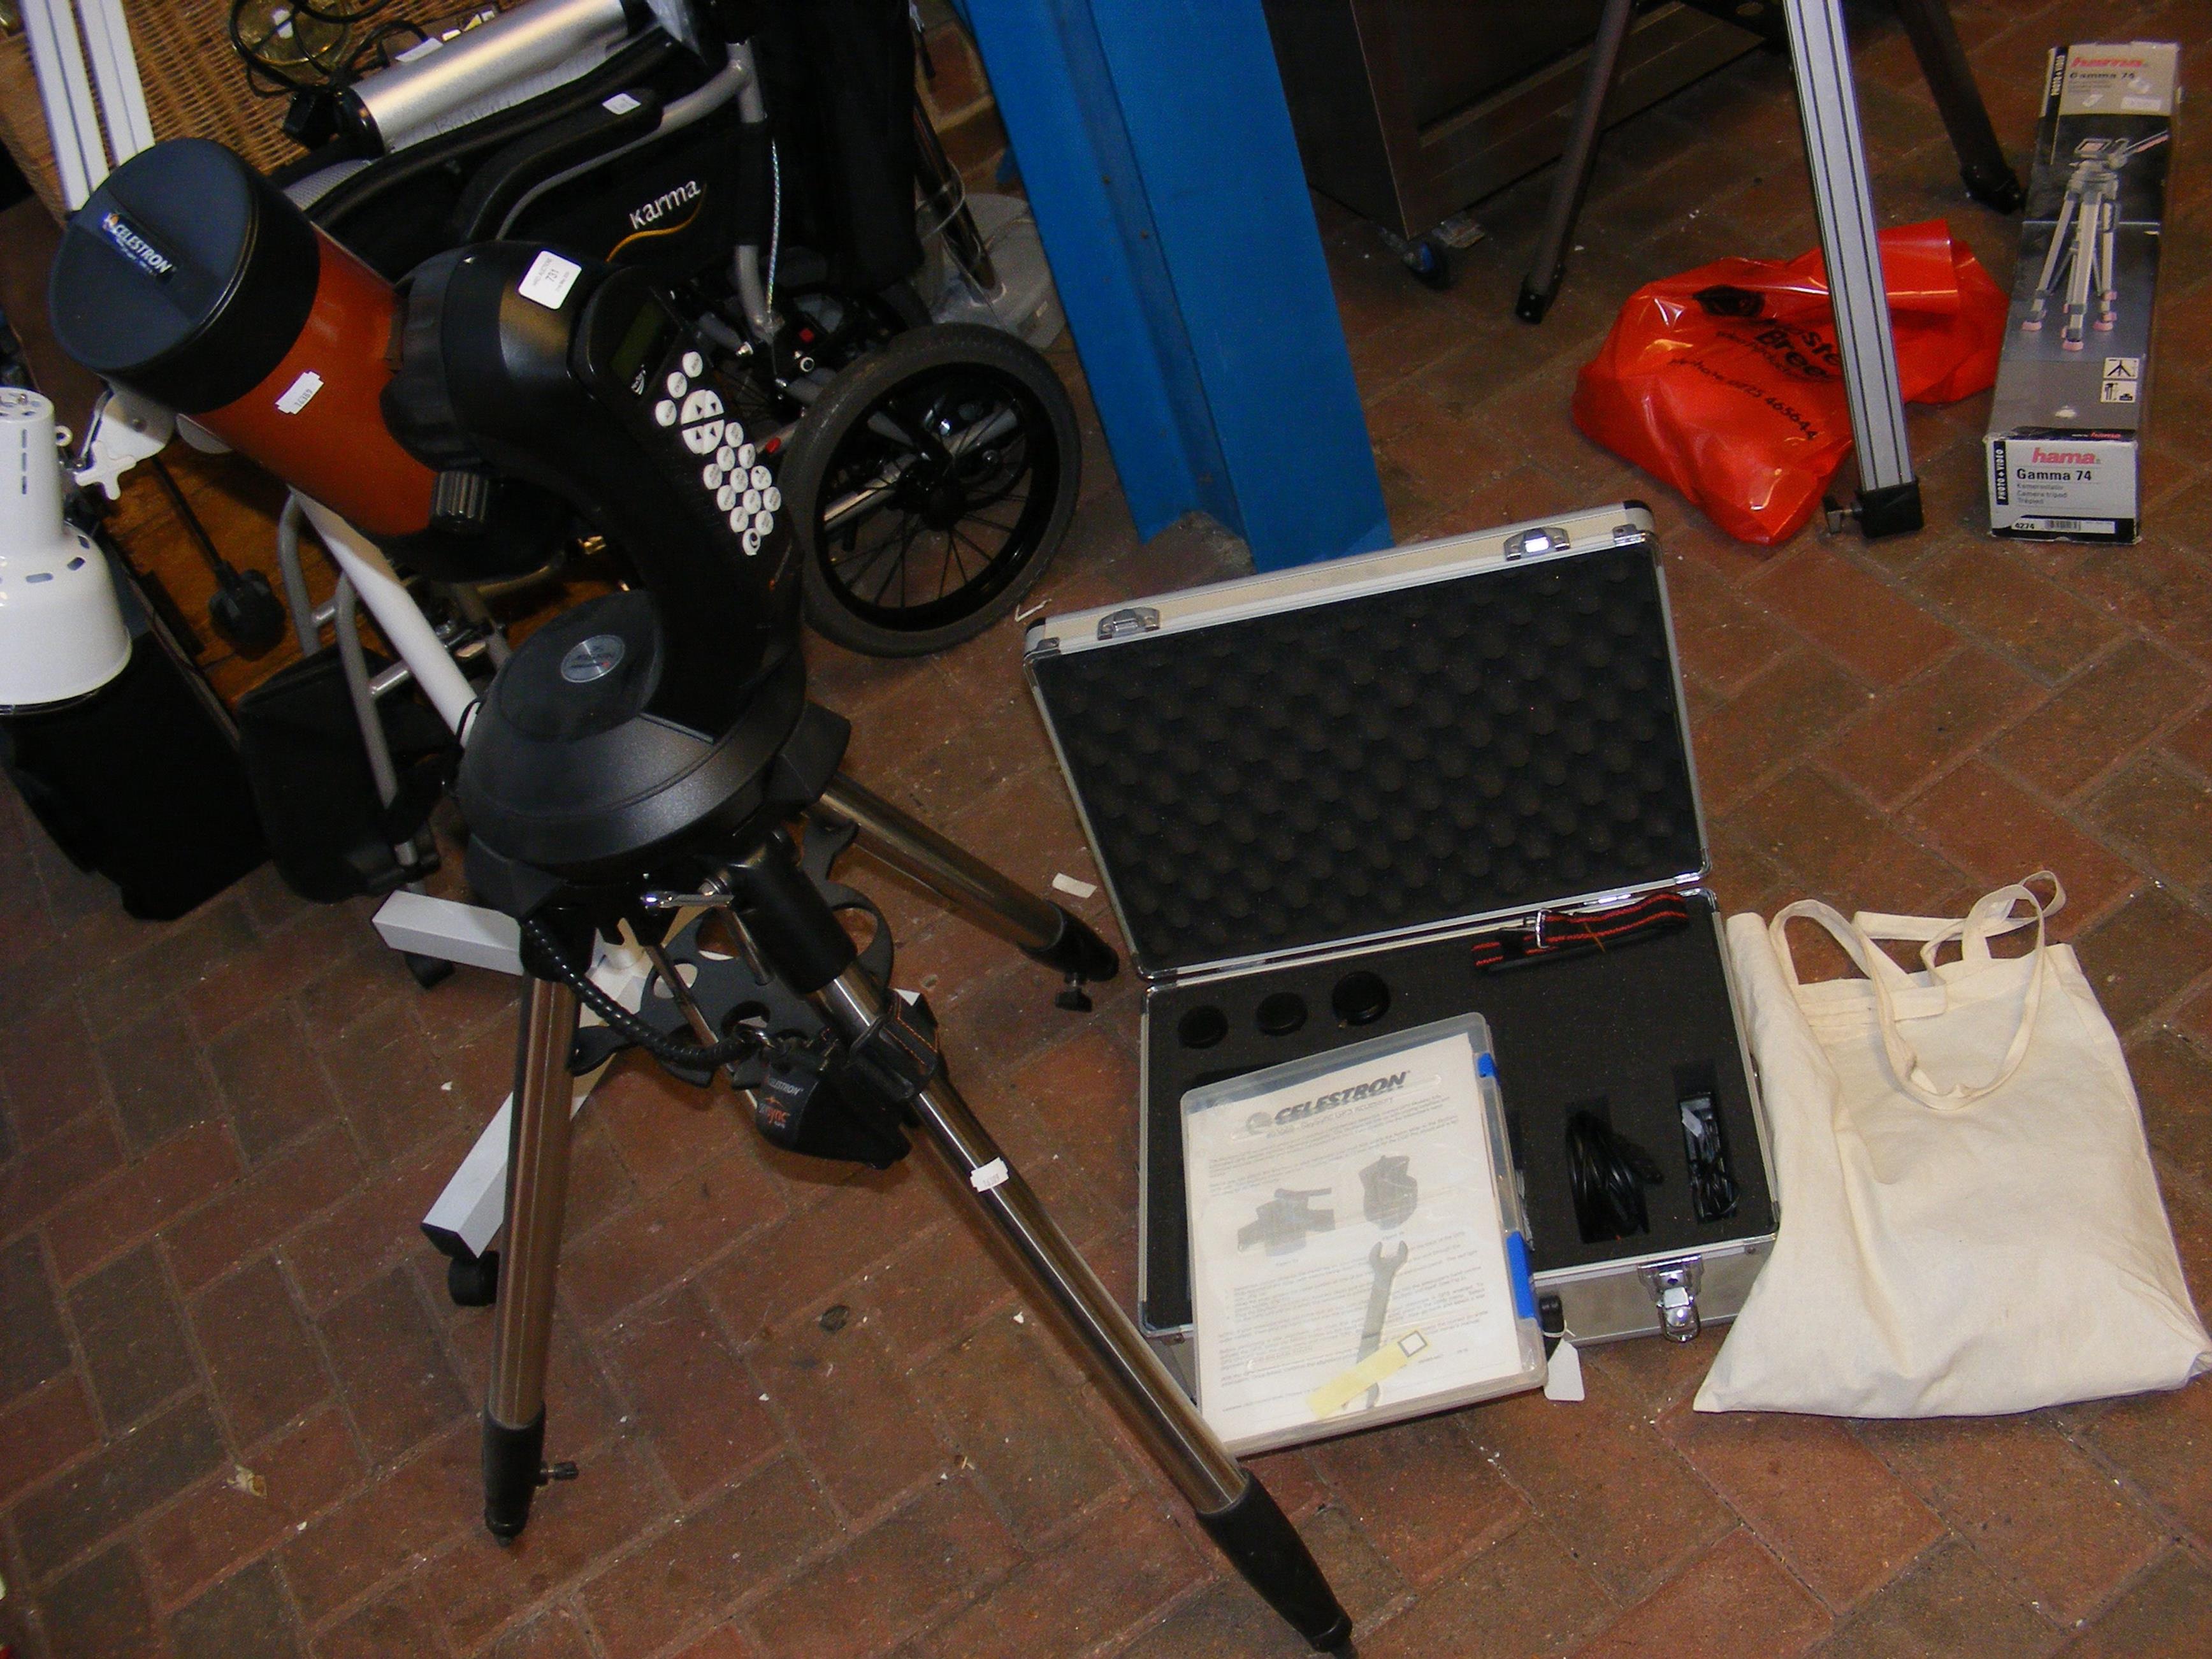 A Celestron NexStar SE telescope on stand with acc